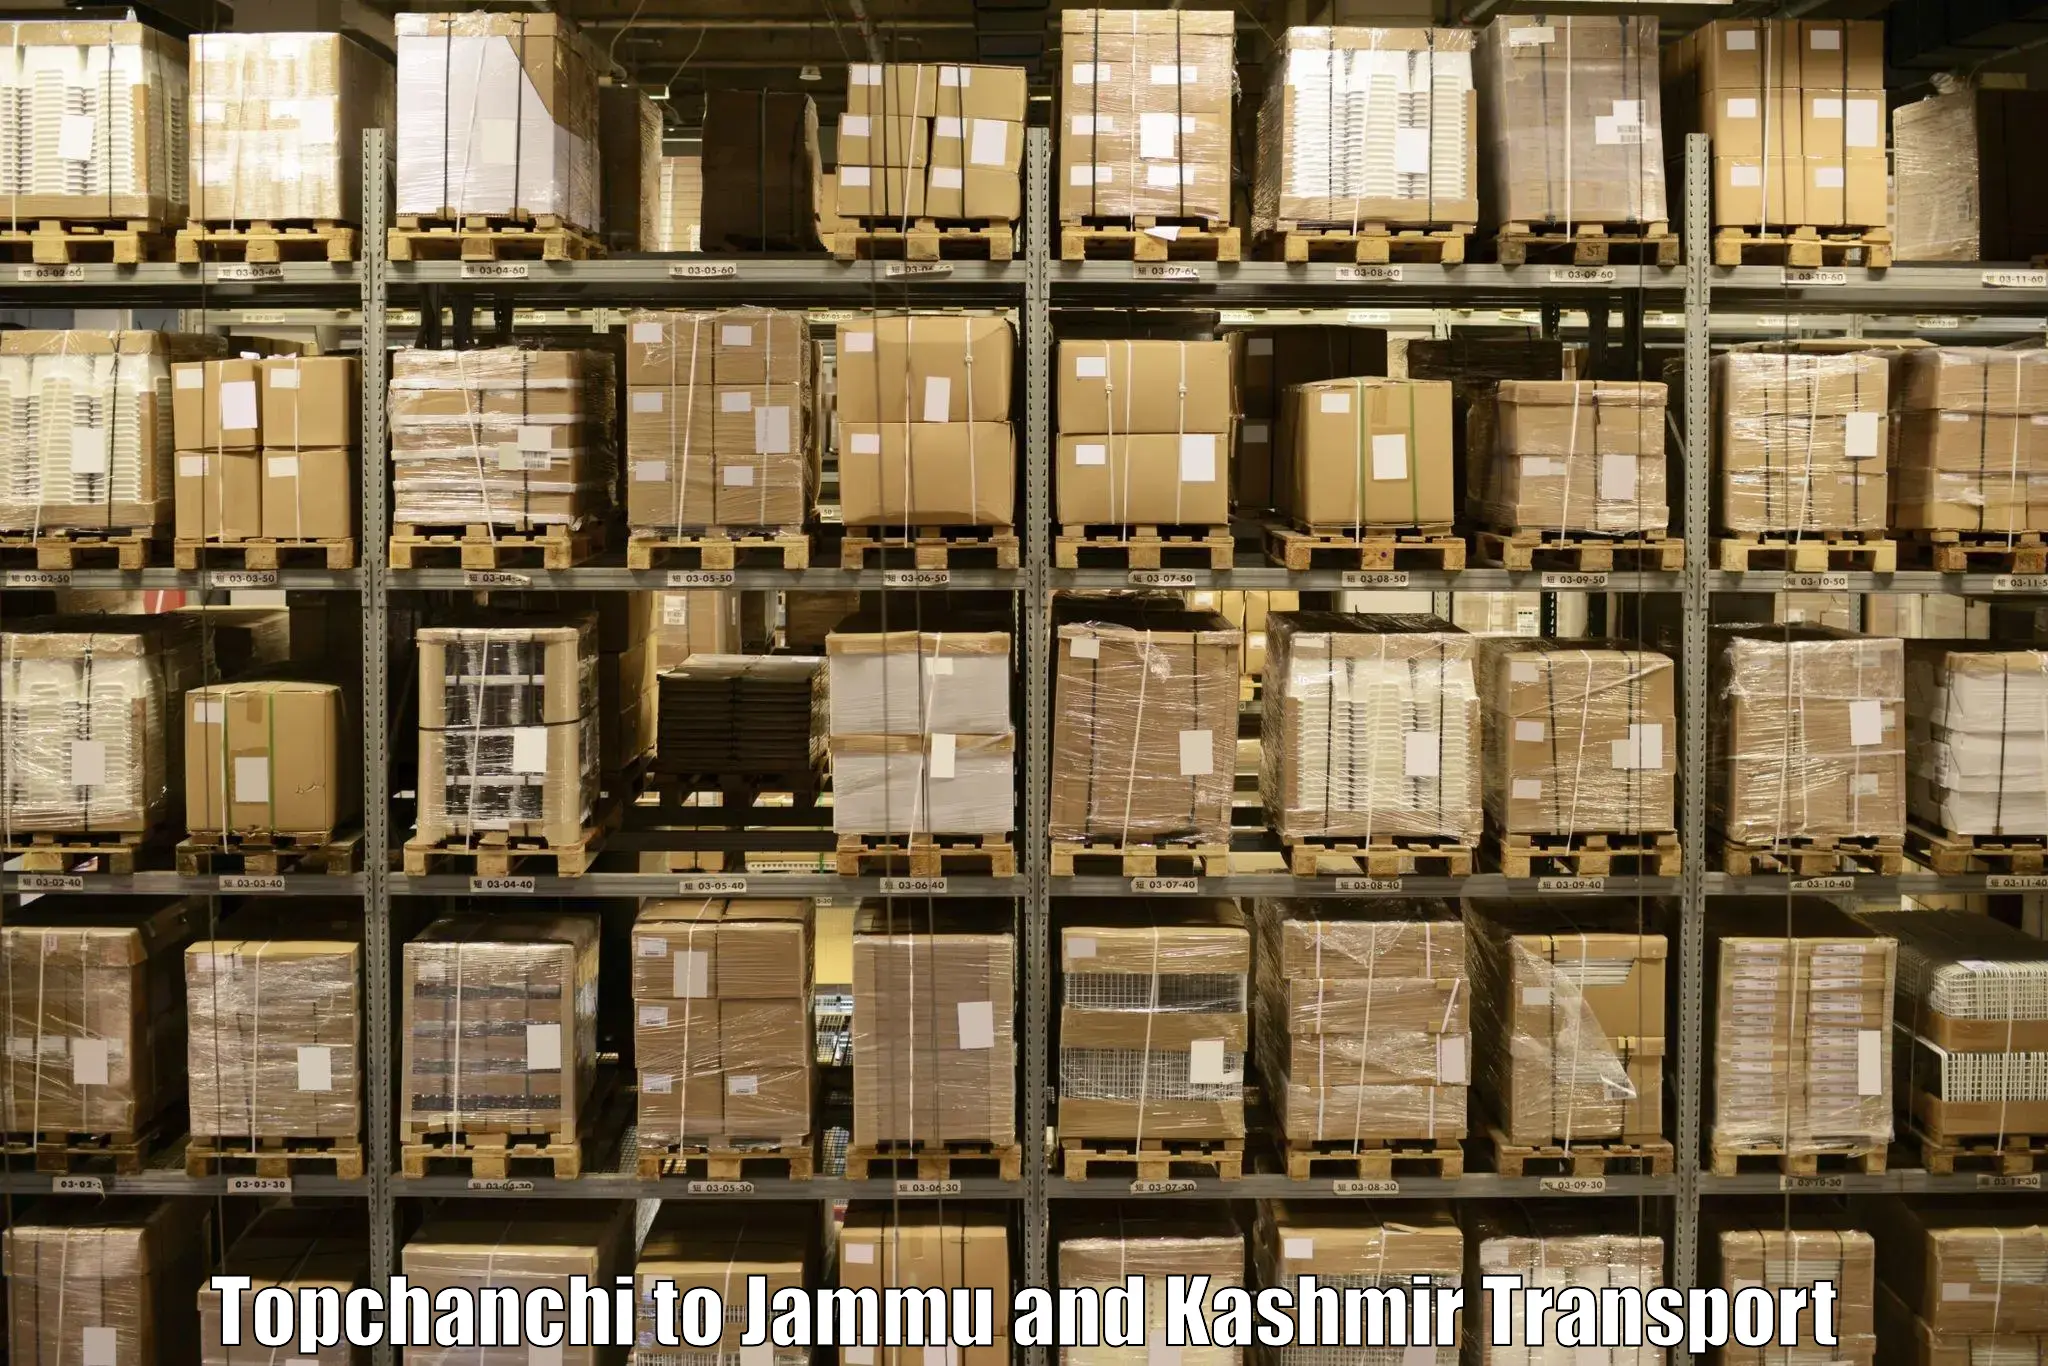 Delivery service Topchanchi to Kargil